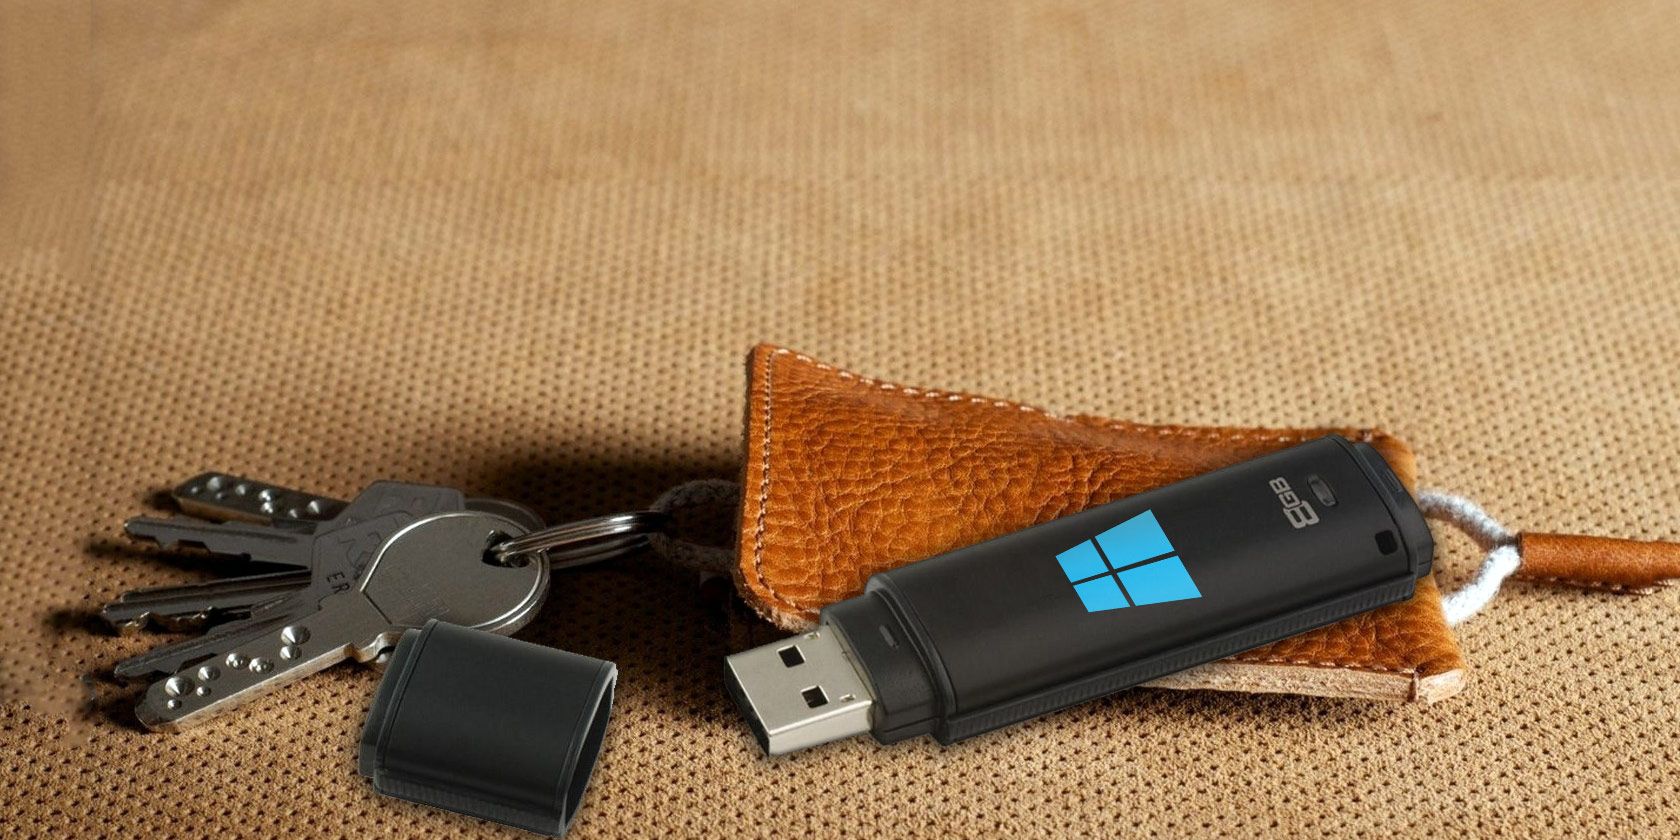 make office 2016 usb install drive for mac